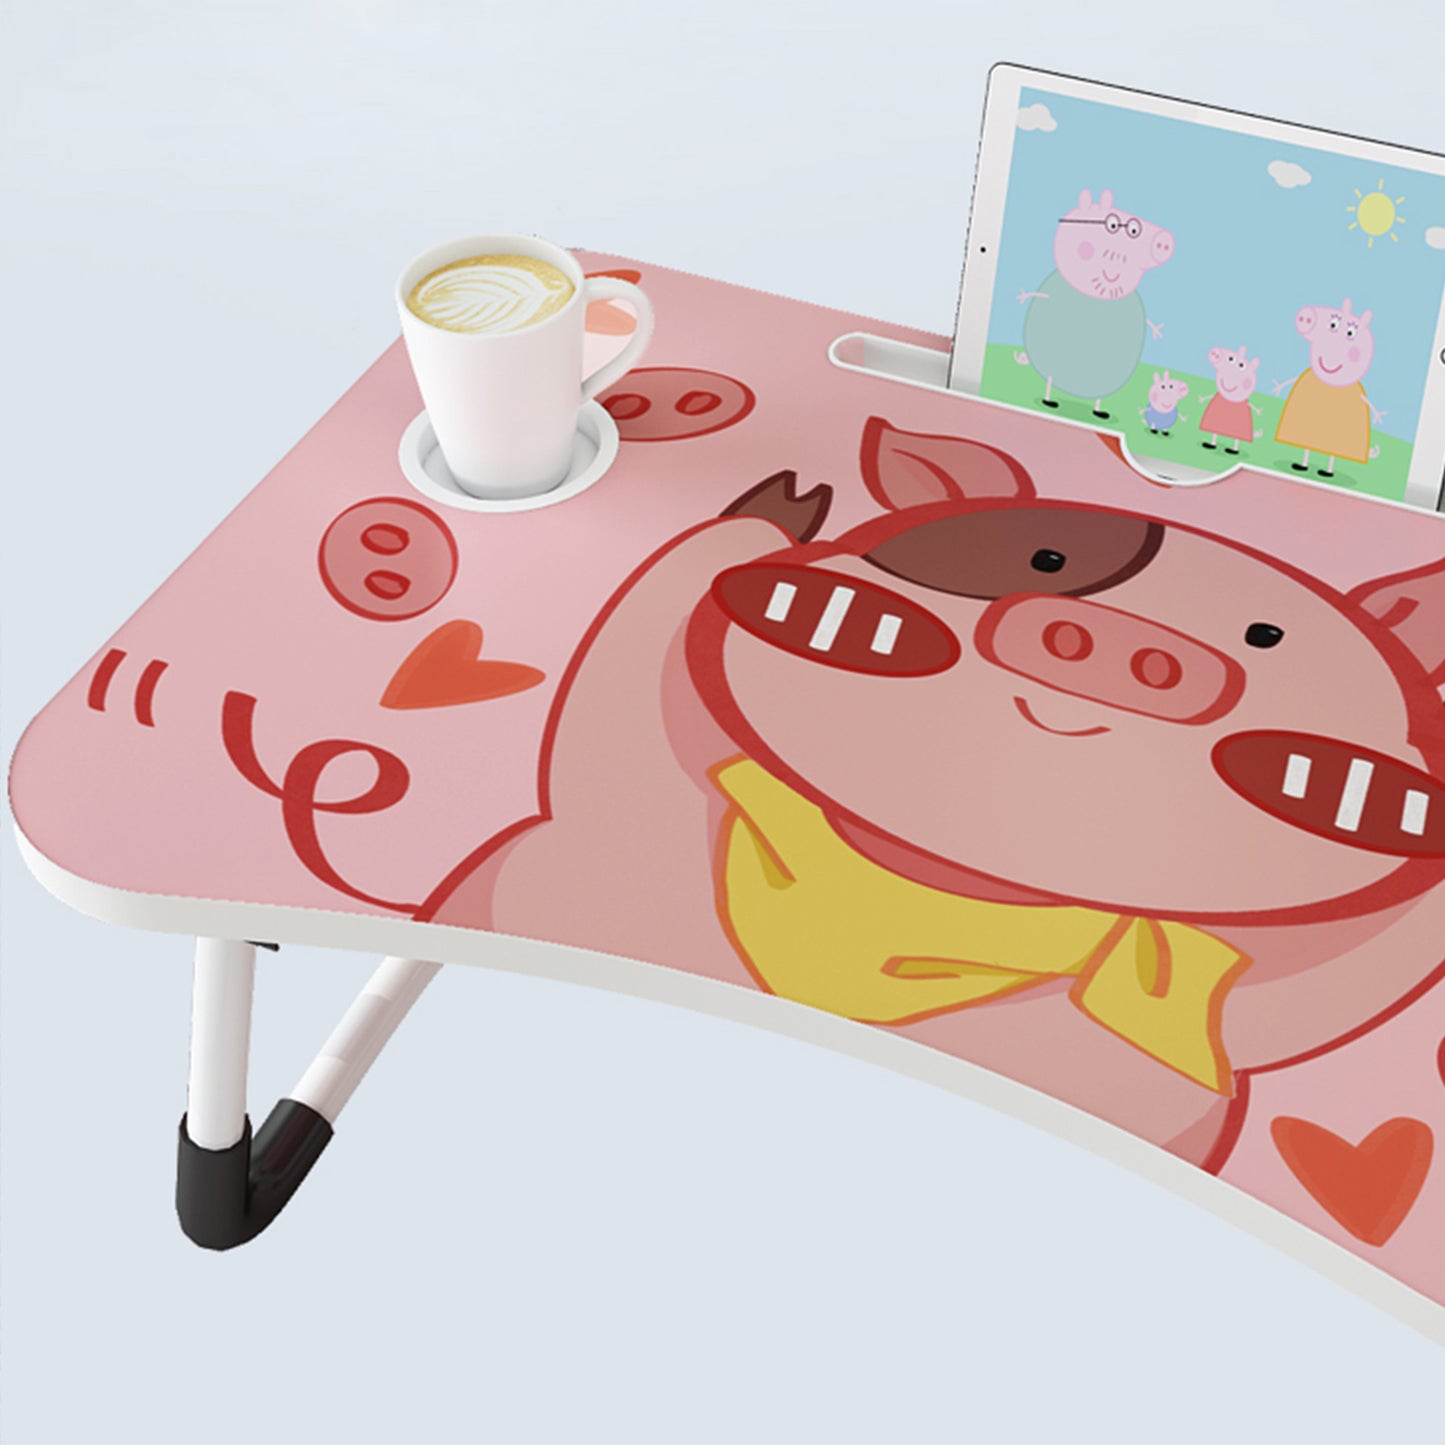 SOGA Cute Pig Design Portable Bed Table Adjustable Foldable Bed Sofa Study Table Laptop Mini Desk with Drawer and Cup Slot Home Decor